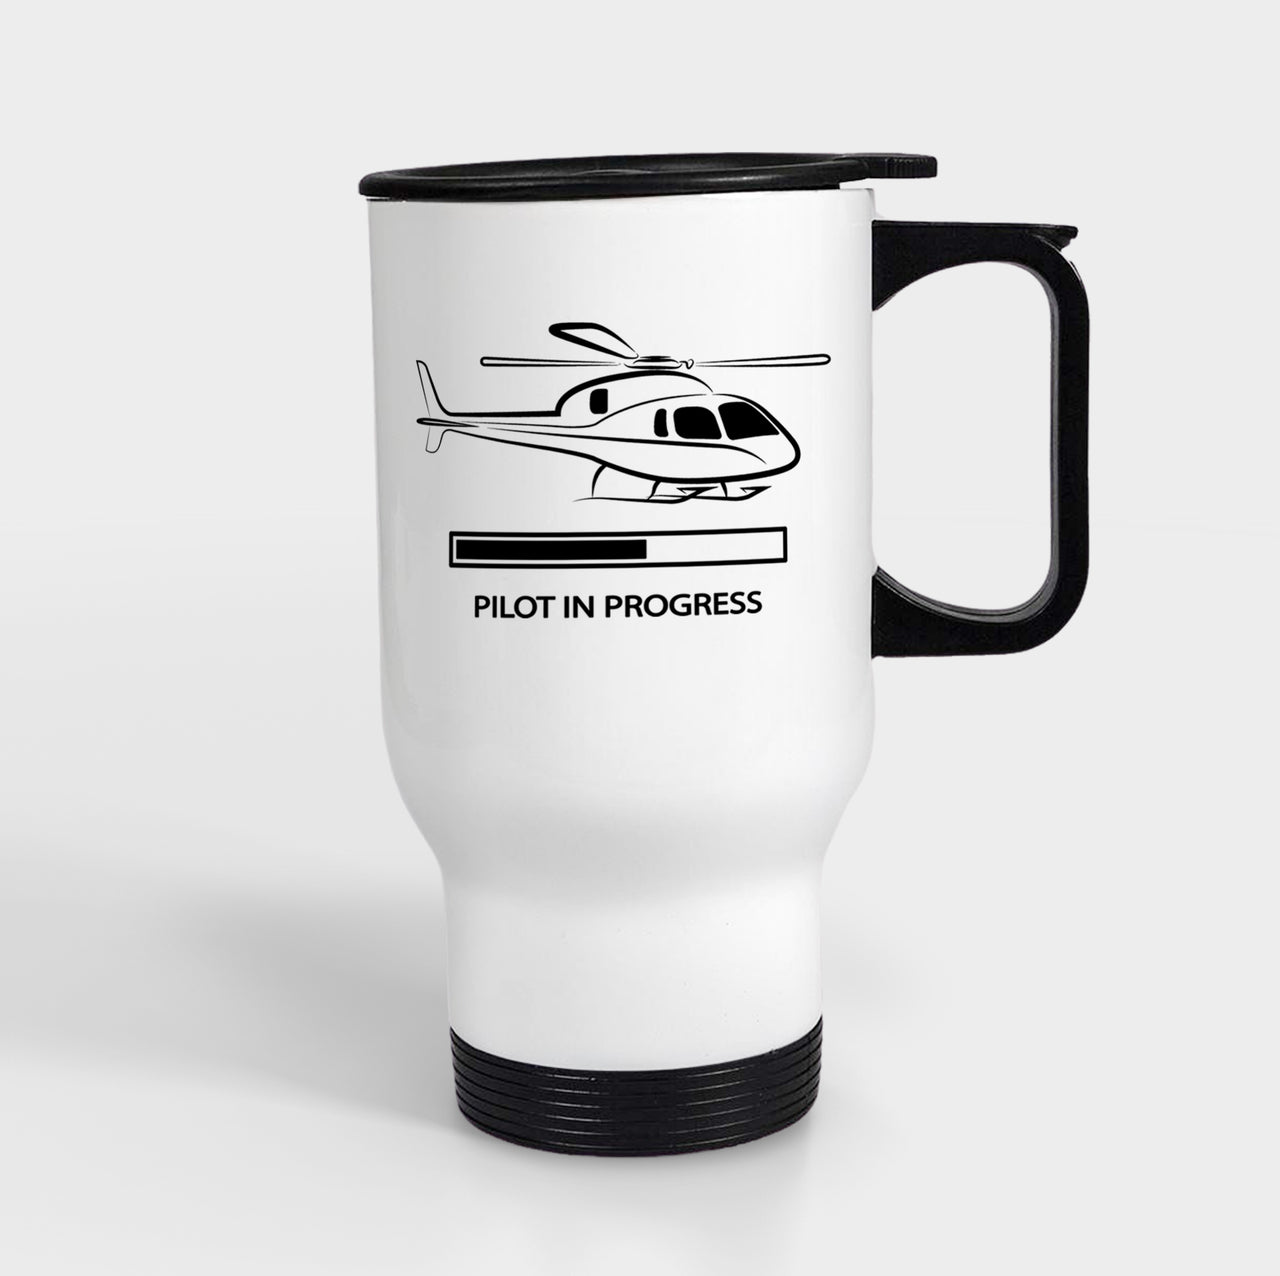 Pilot In Progress (Helicopter) Designed Travel Mugs (With Holder)